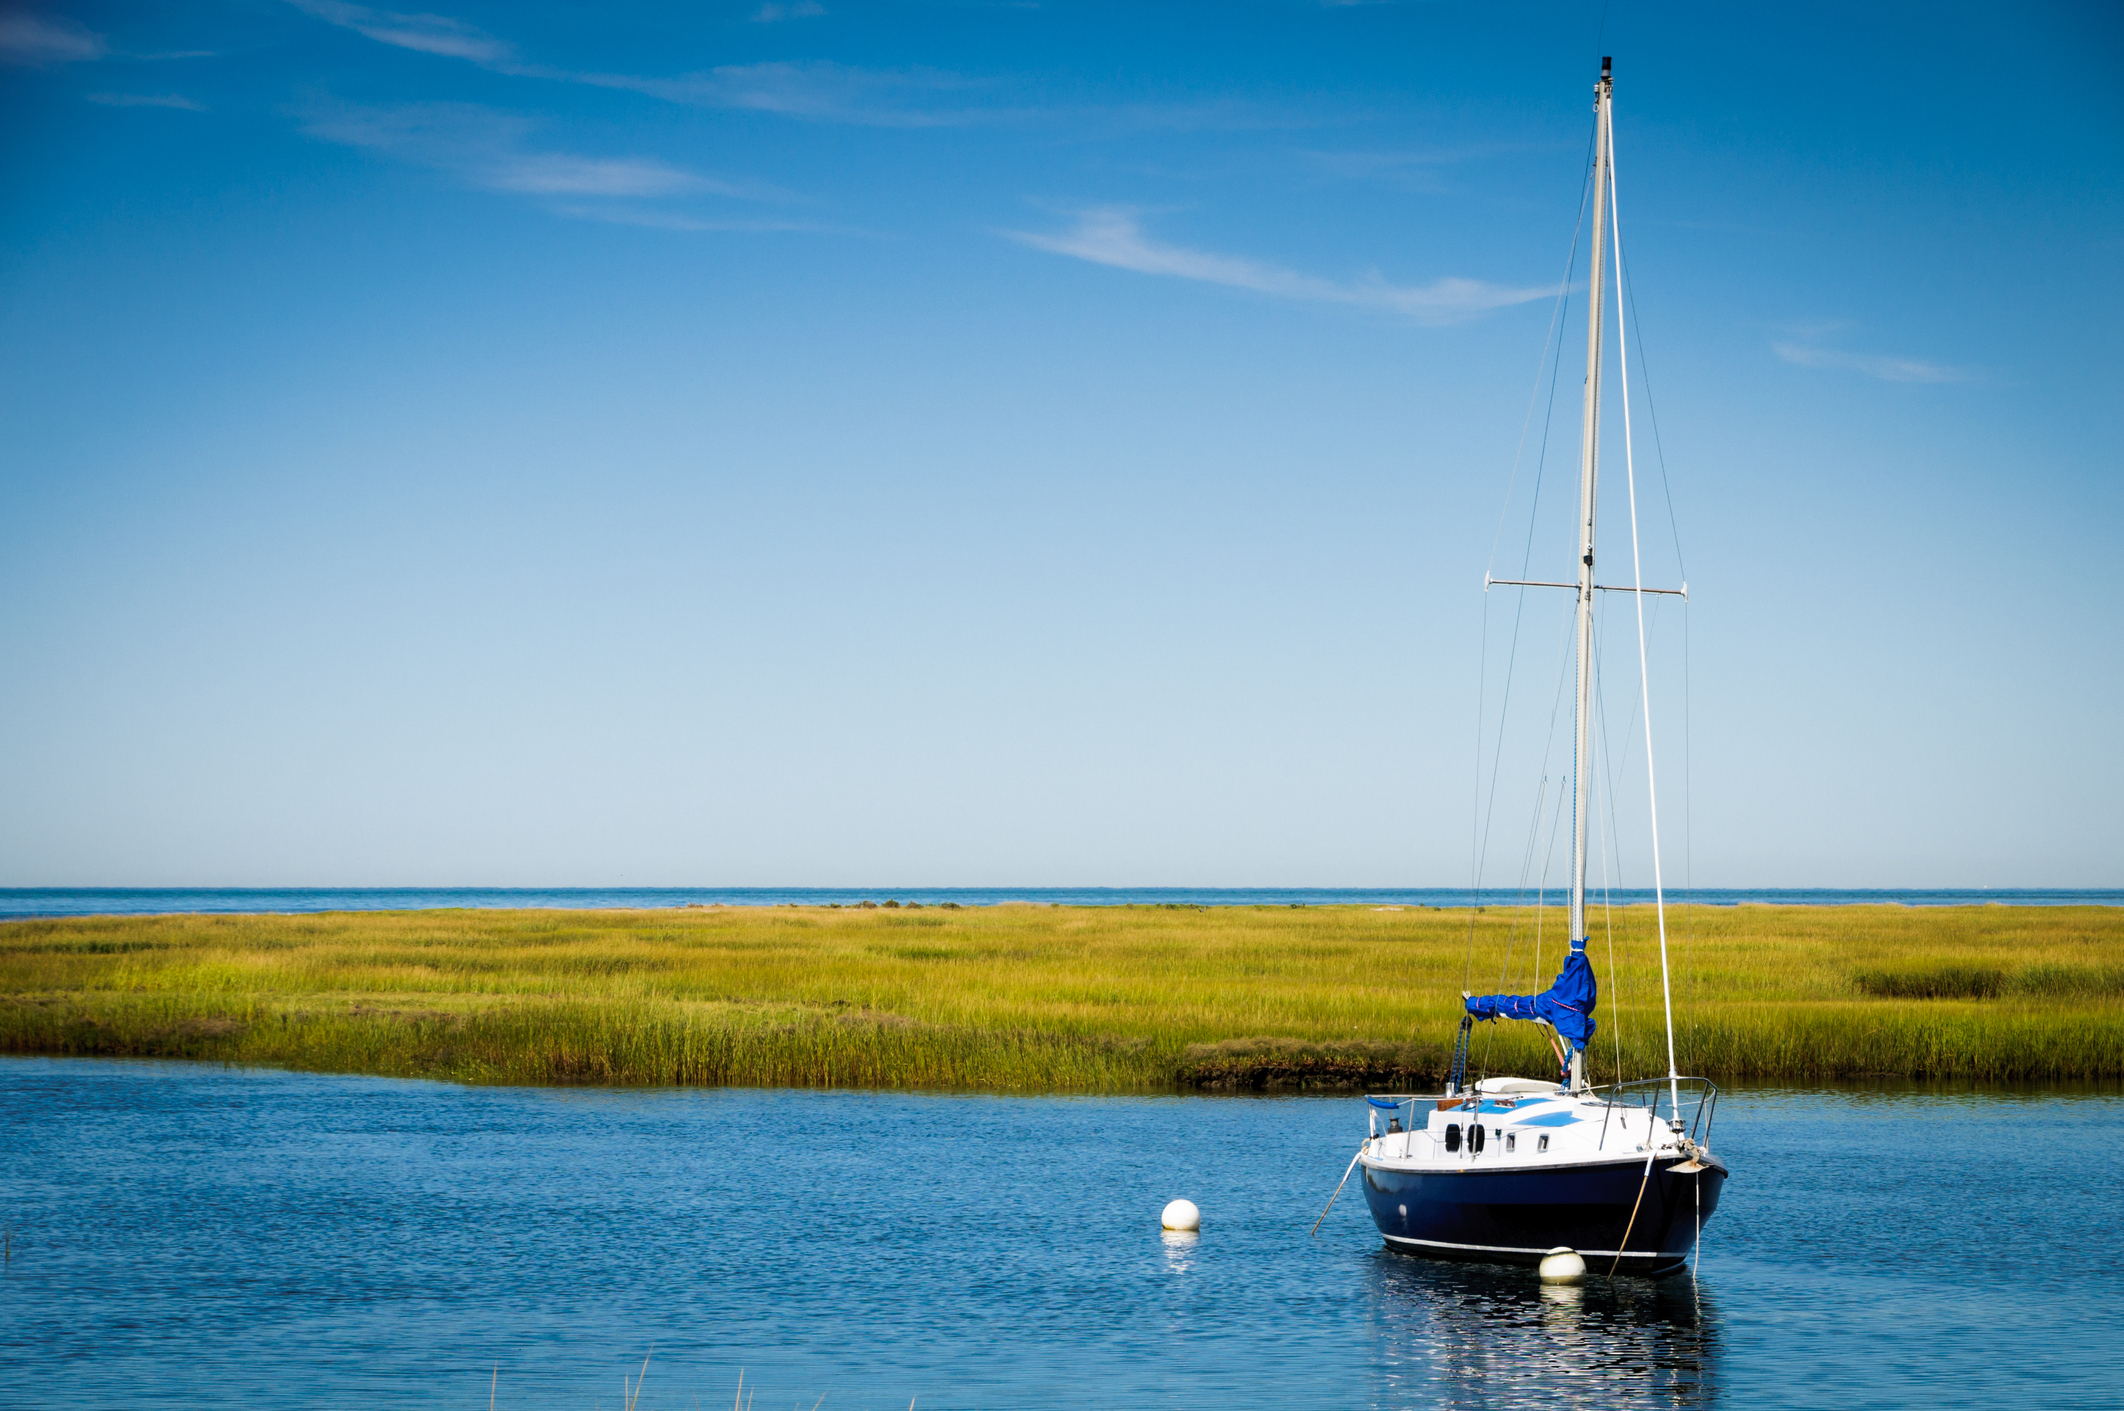 A sleek blue and white sailboat is moored in a quiet inlet of Cape Cod Bay